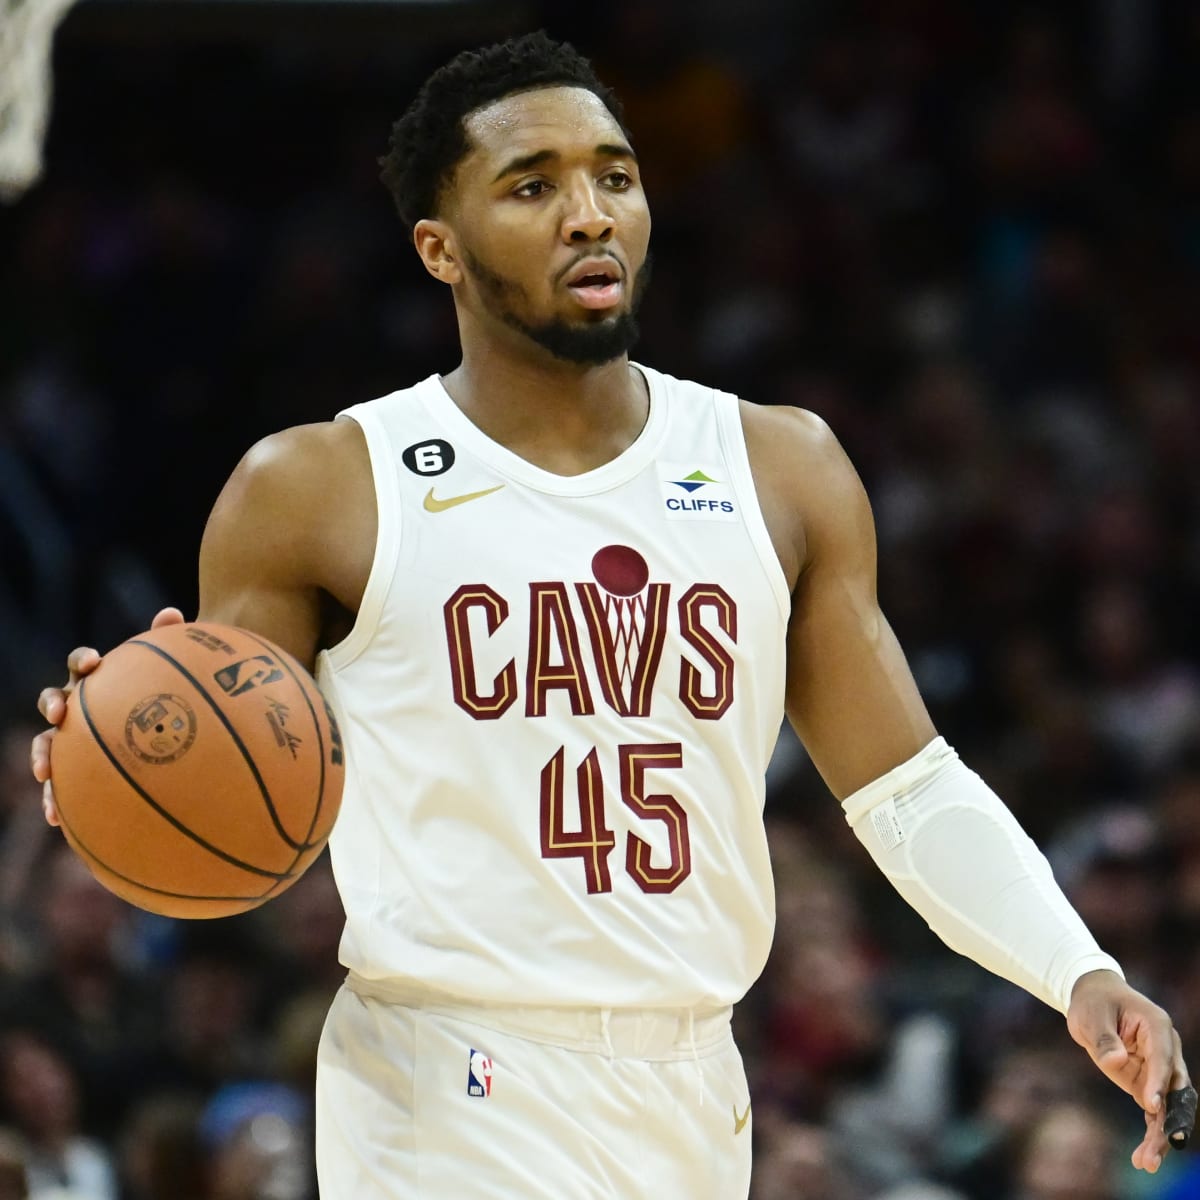 Look for Cavs' Donovan Mitchell to get back on track heading into 2023